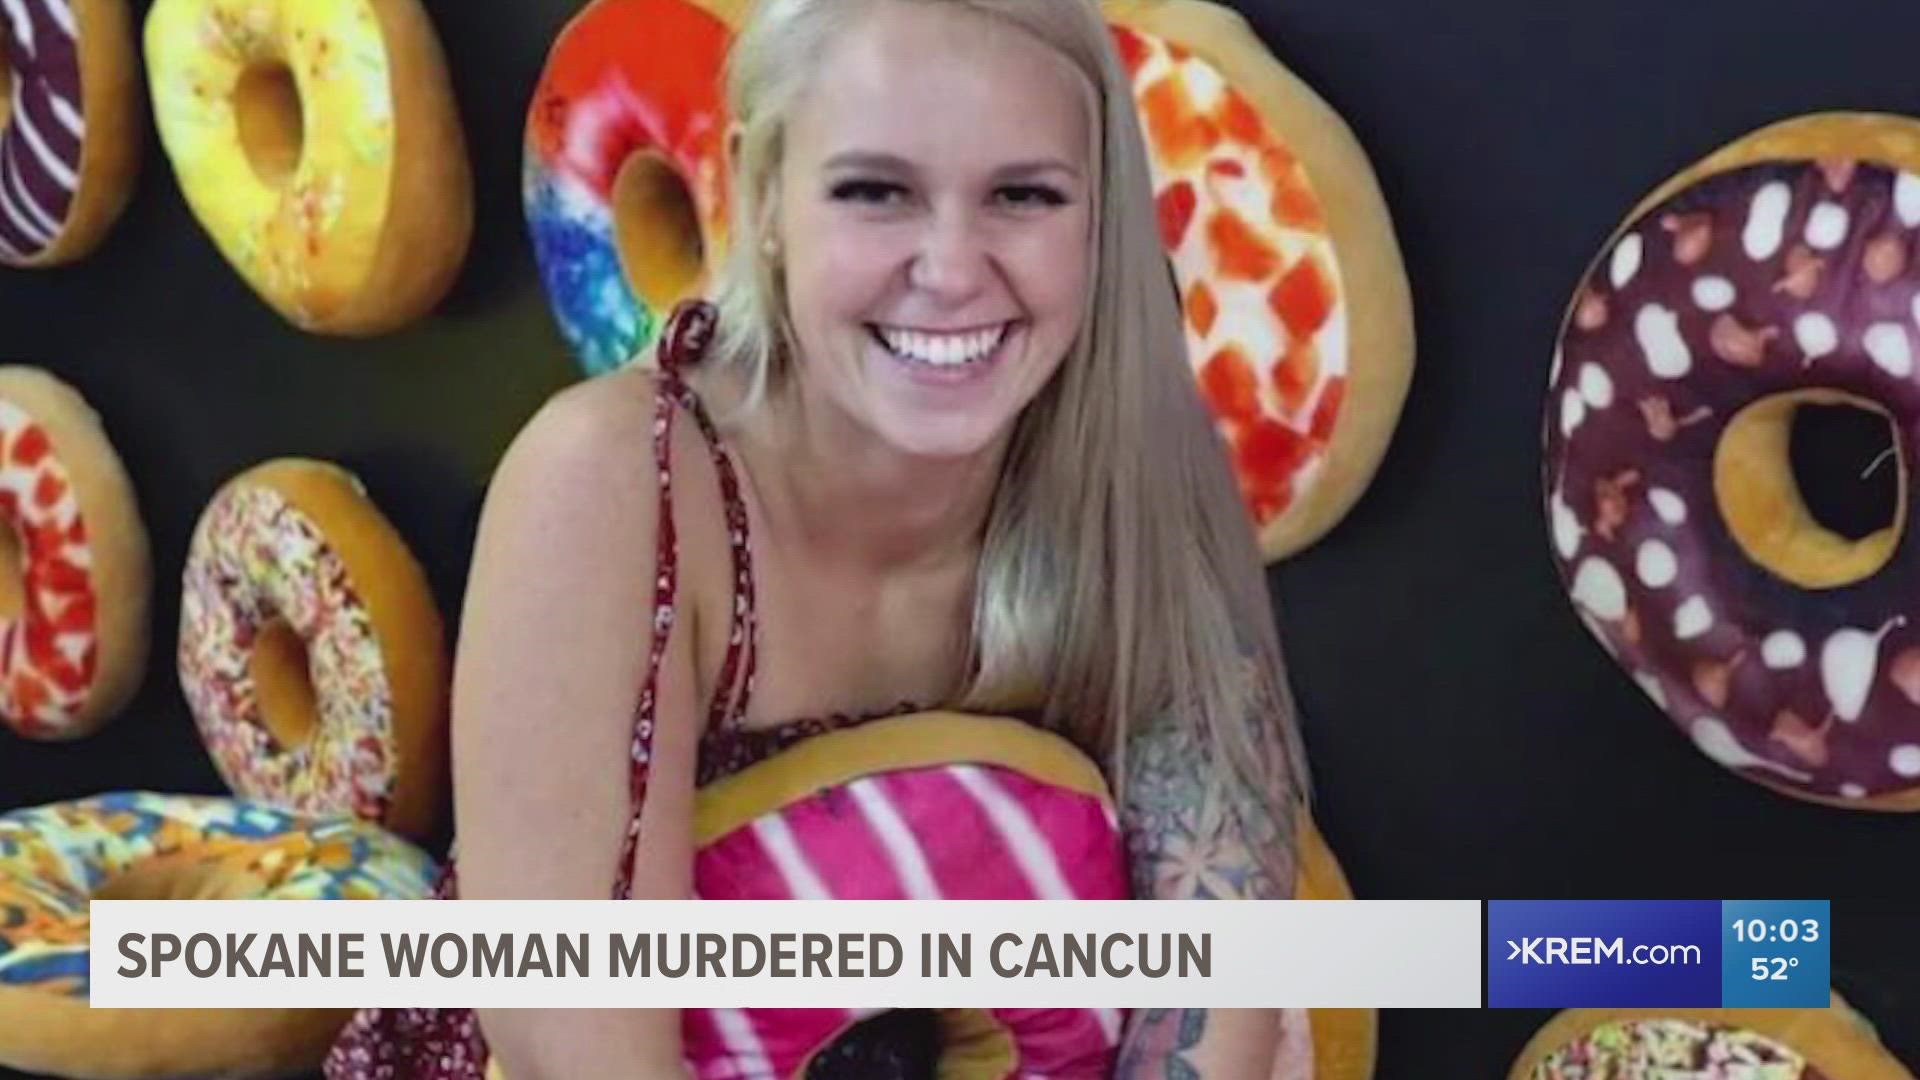 According to her family, Sativa Transue, 26, was in Cancun with her boyfriend when she was found dead in her hotel room.